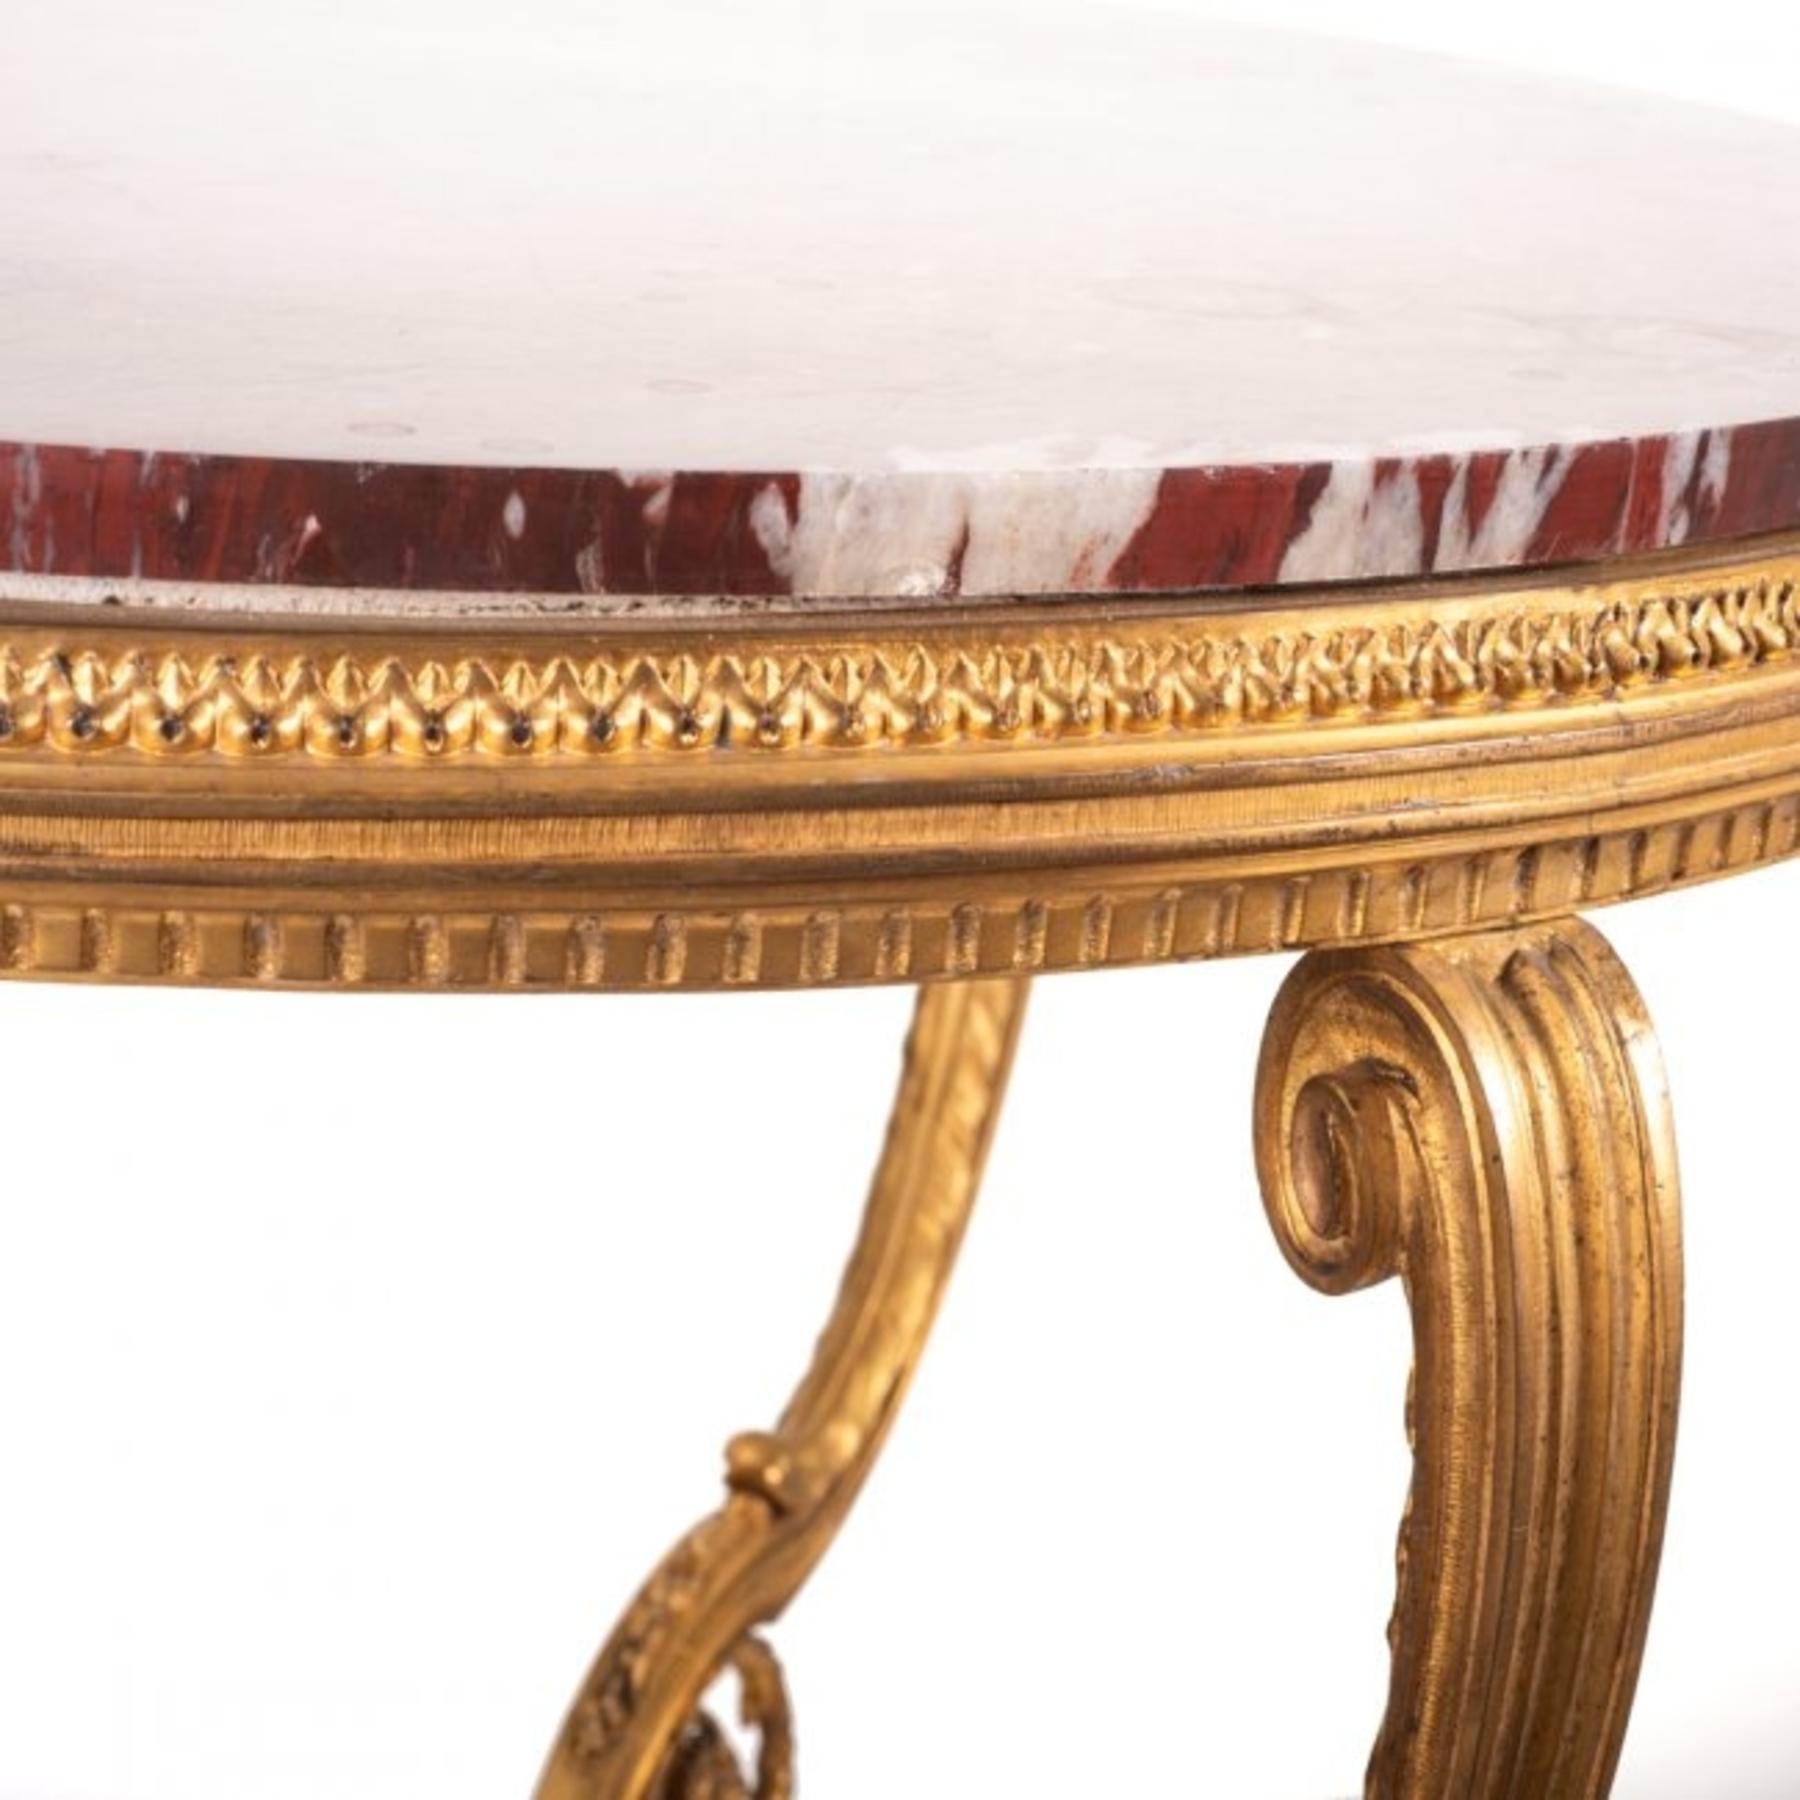 A gilt bronze and red marble guéridon table
in Louis XVI style,
19th-20th century
the top with striated red marble on three shaped legs joined by a circular marble shelf, the clove feet joined by a pierced concave-sided triform